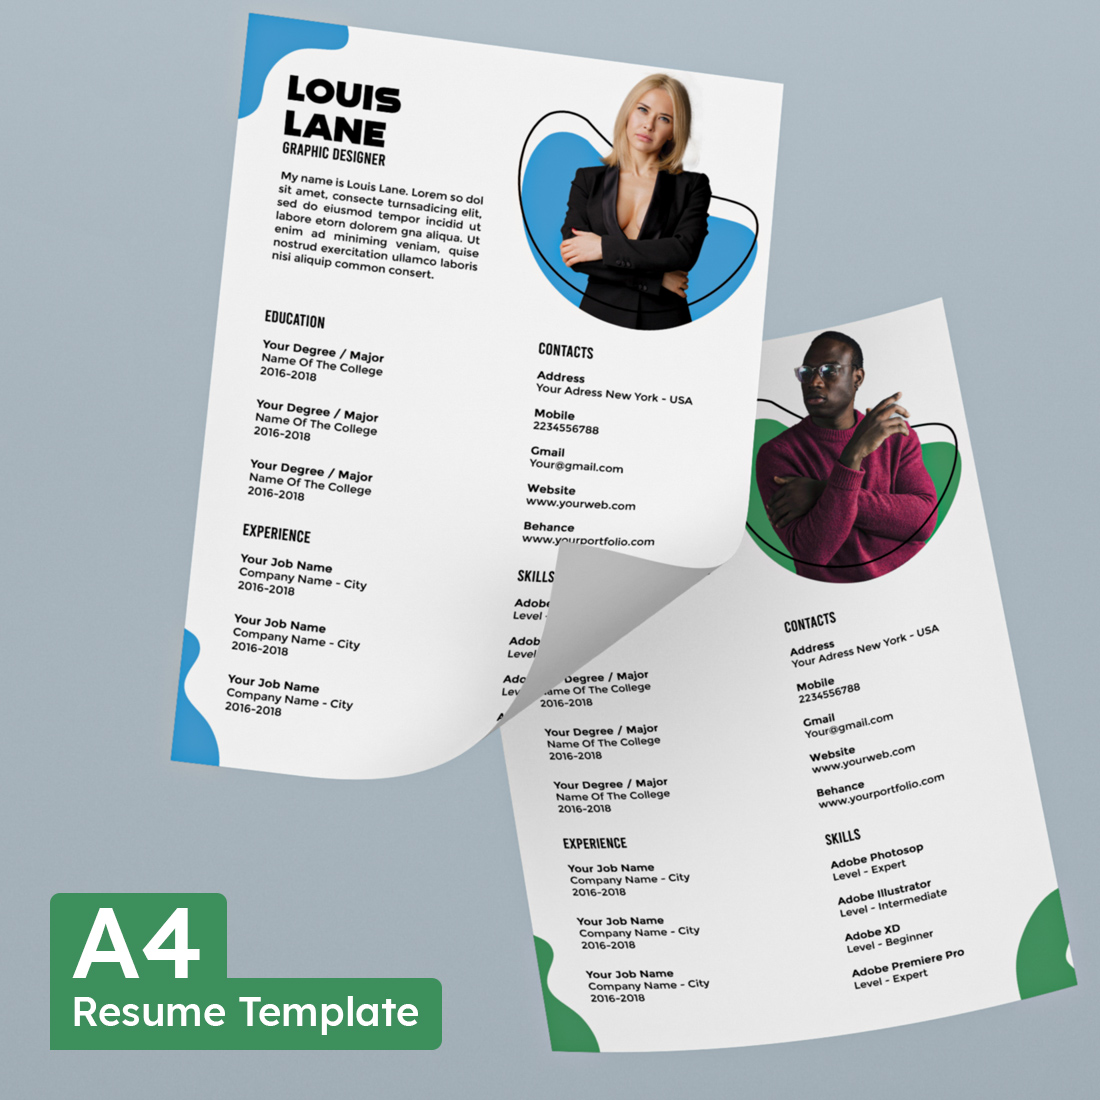 Professional resume template with a photo of a woman.